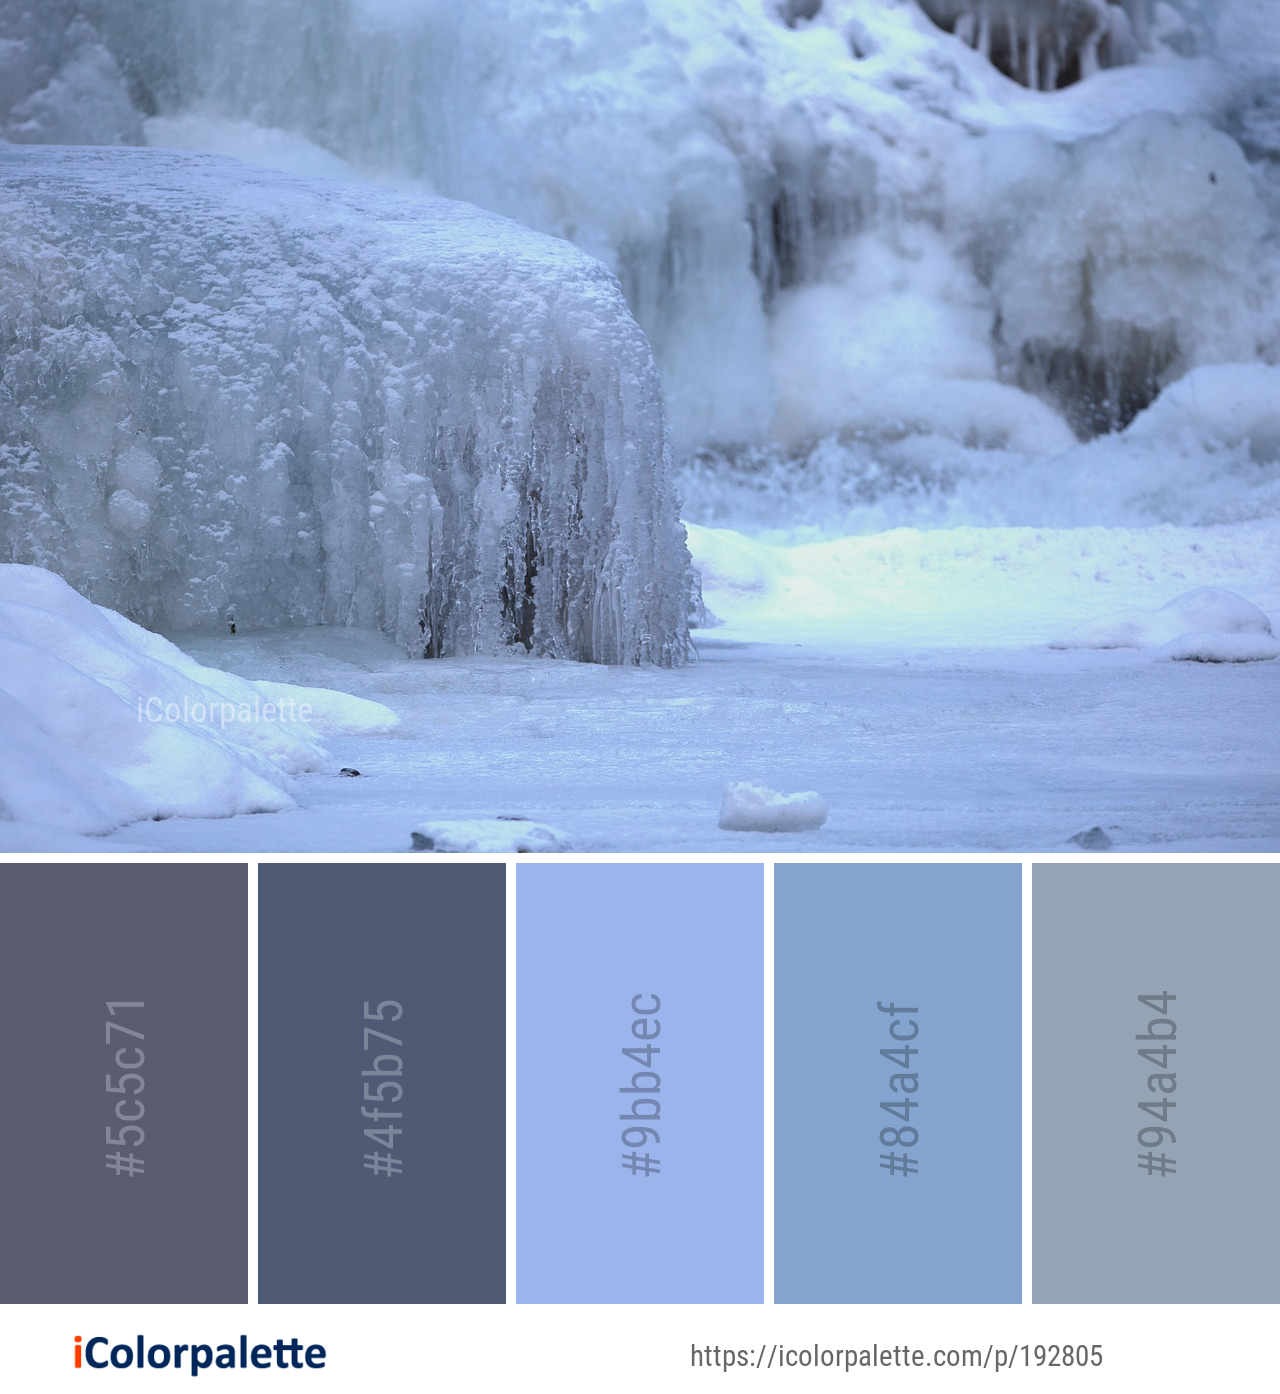 192805_water_snow_freezing_icolorpalette